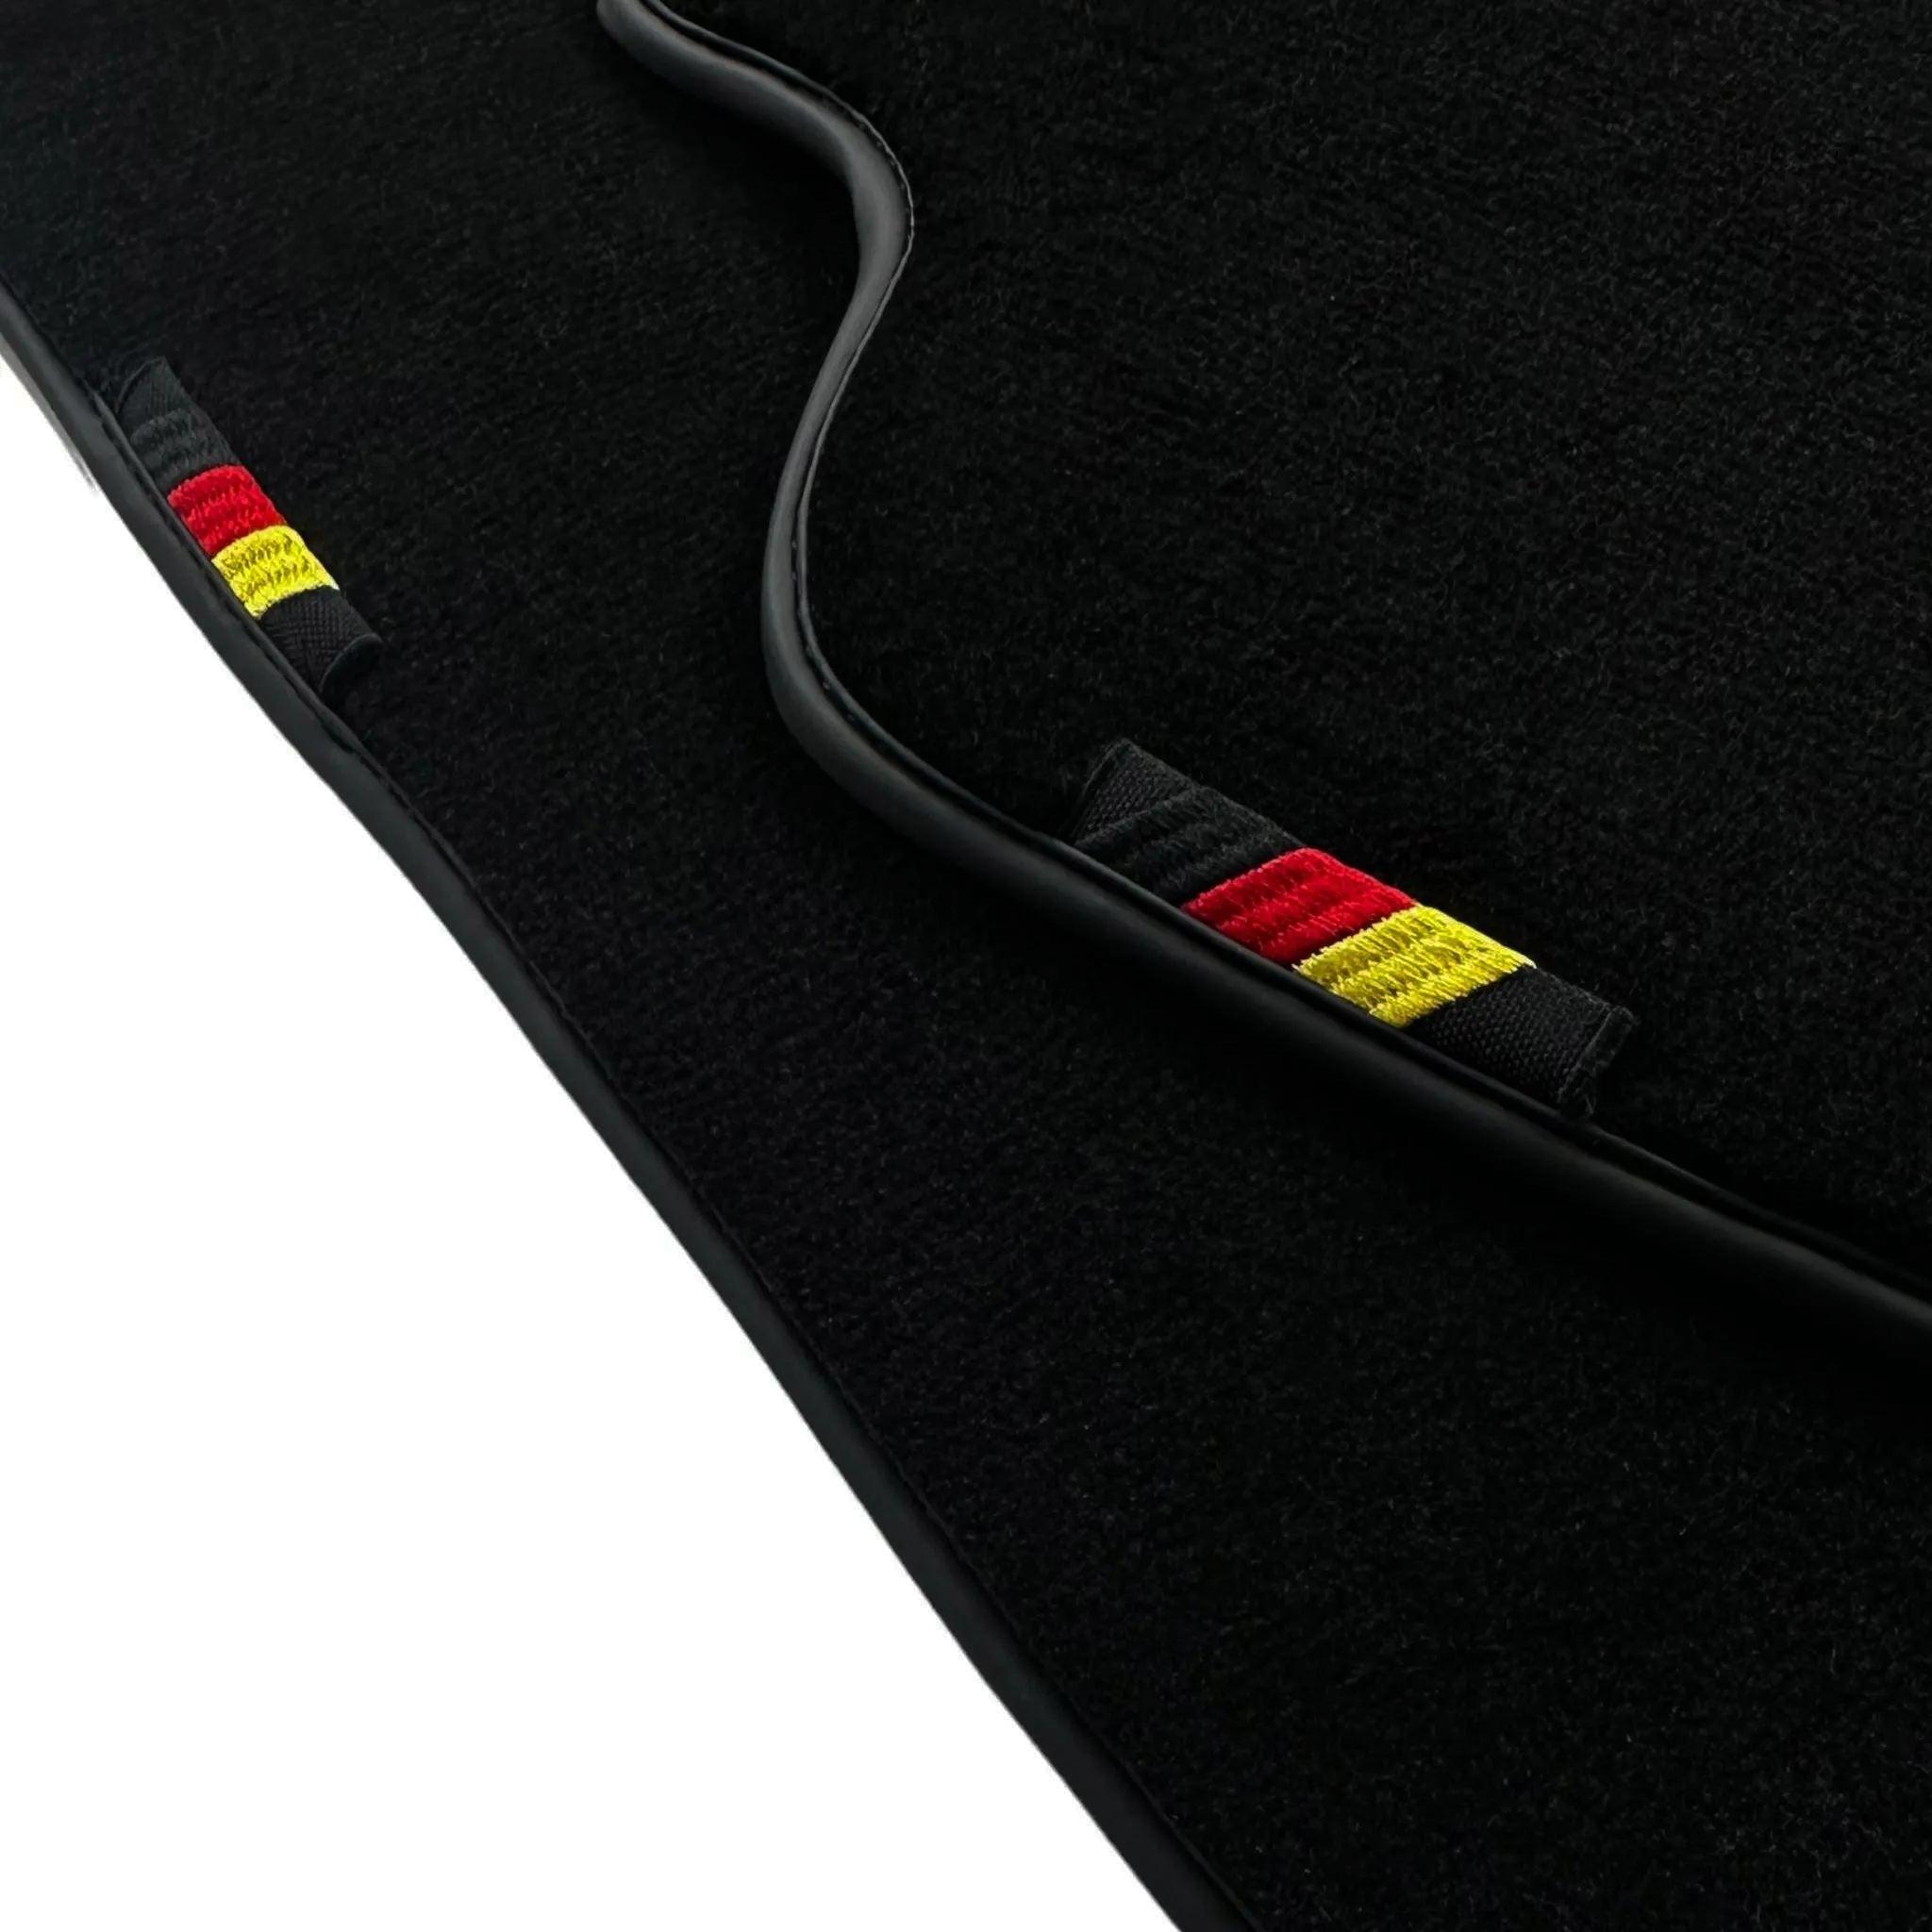 Black Floor Mats For BMW M5 E39 Germany Edition - AutoWin